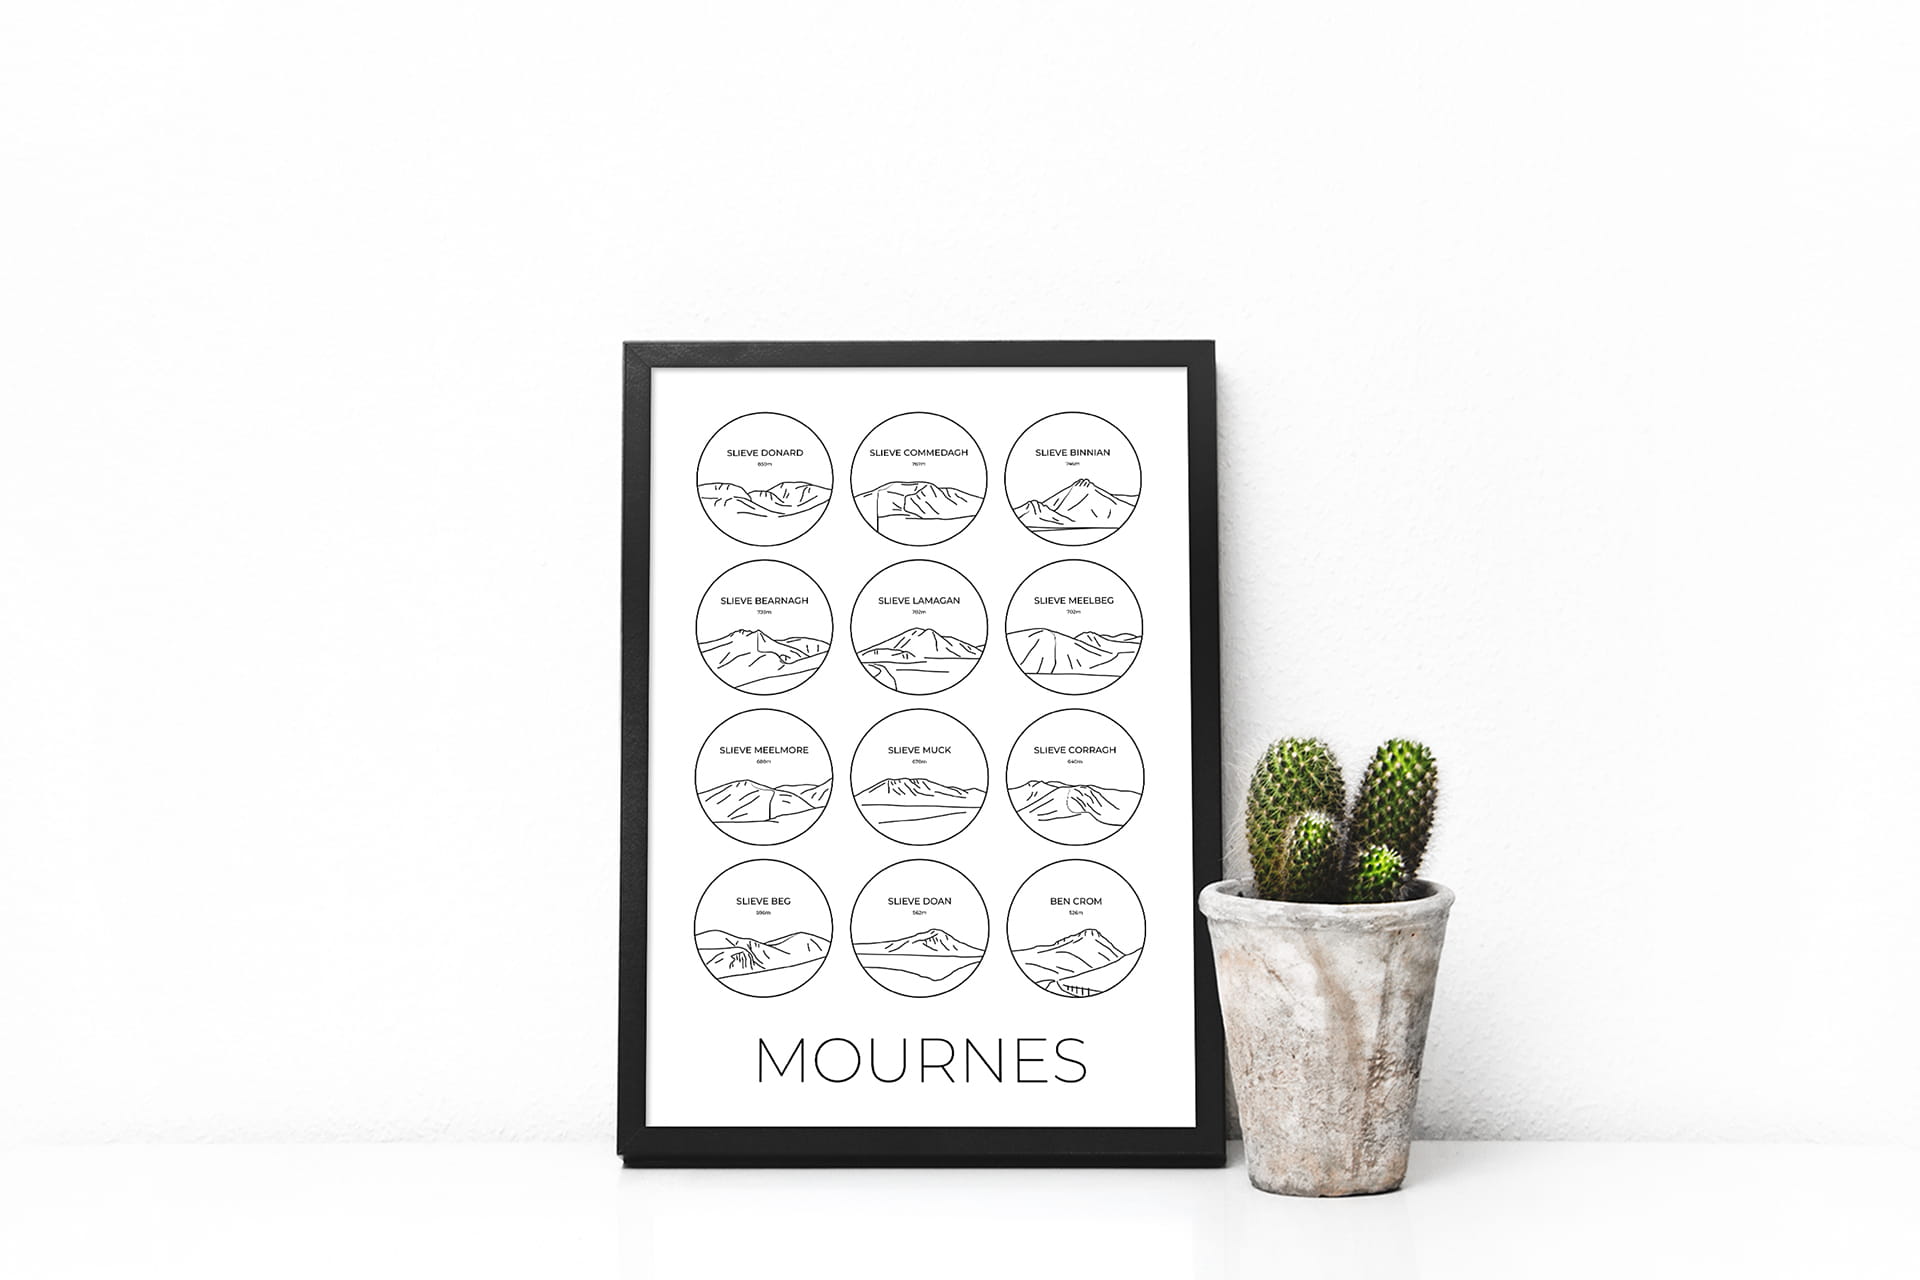 Mourne Mountains collage line art print in a picture frame